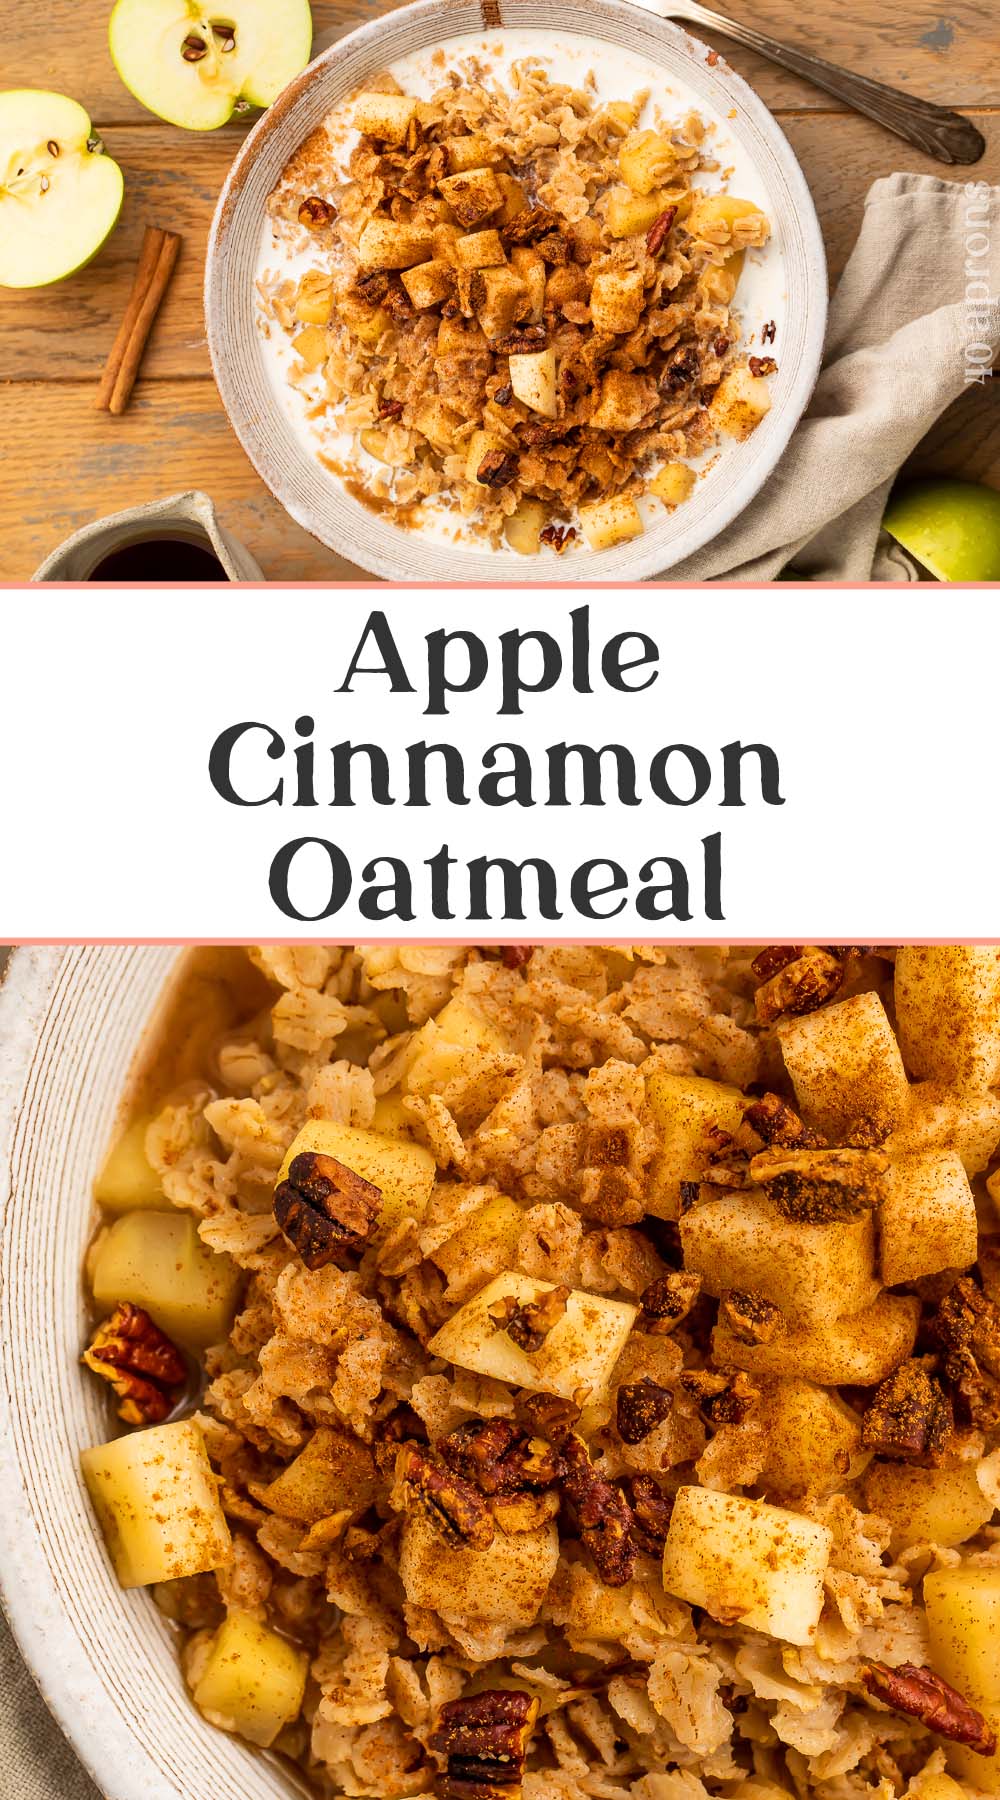 Pin graphic for apple cinnamon oatmeal.